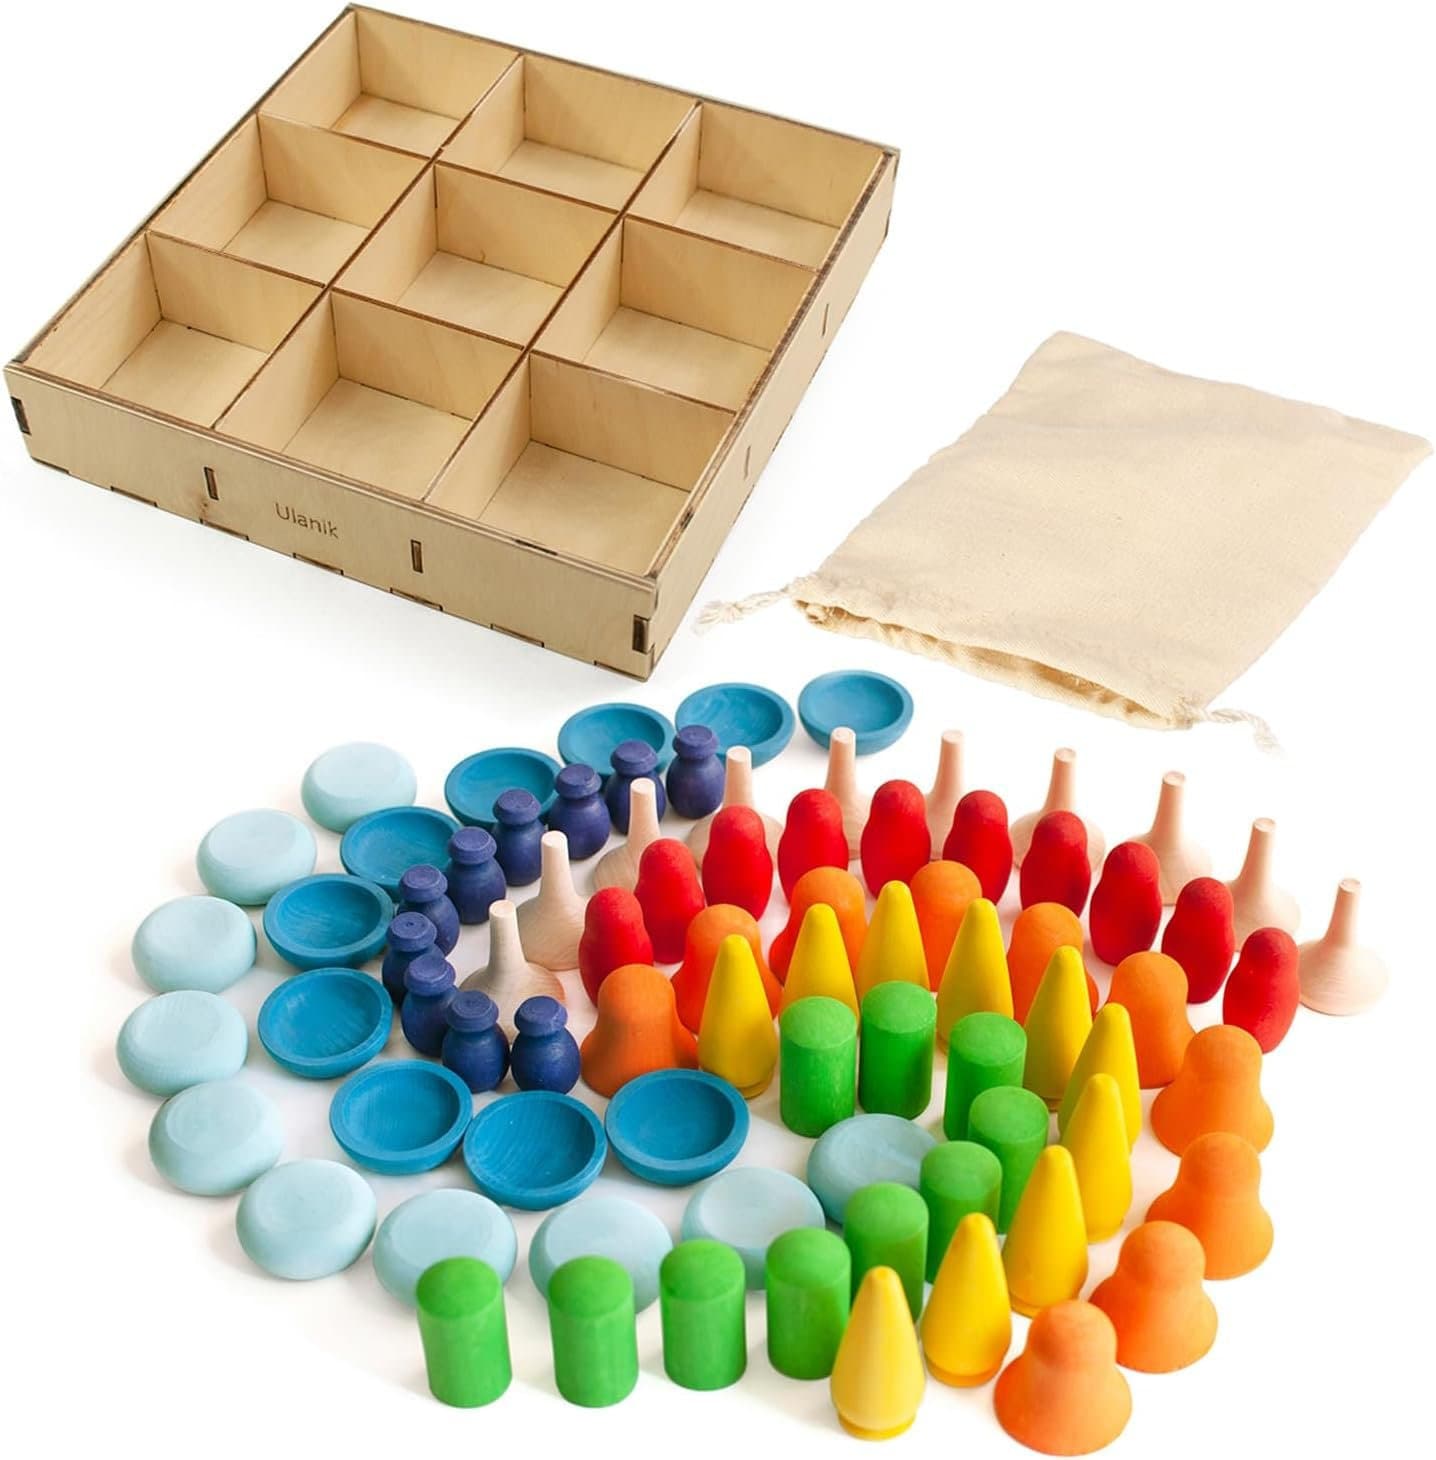 Ulanik Sorting Cups Toddler Montessori Toys for 3+ Year Old Wooden Sta